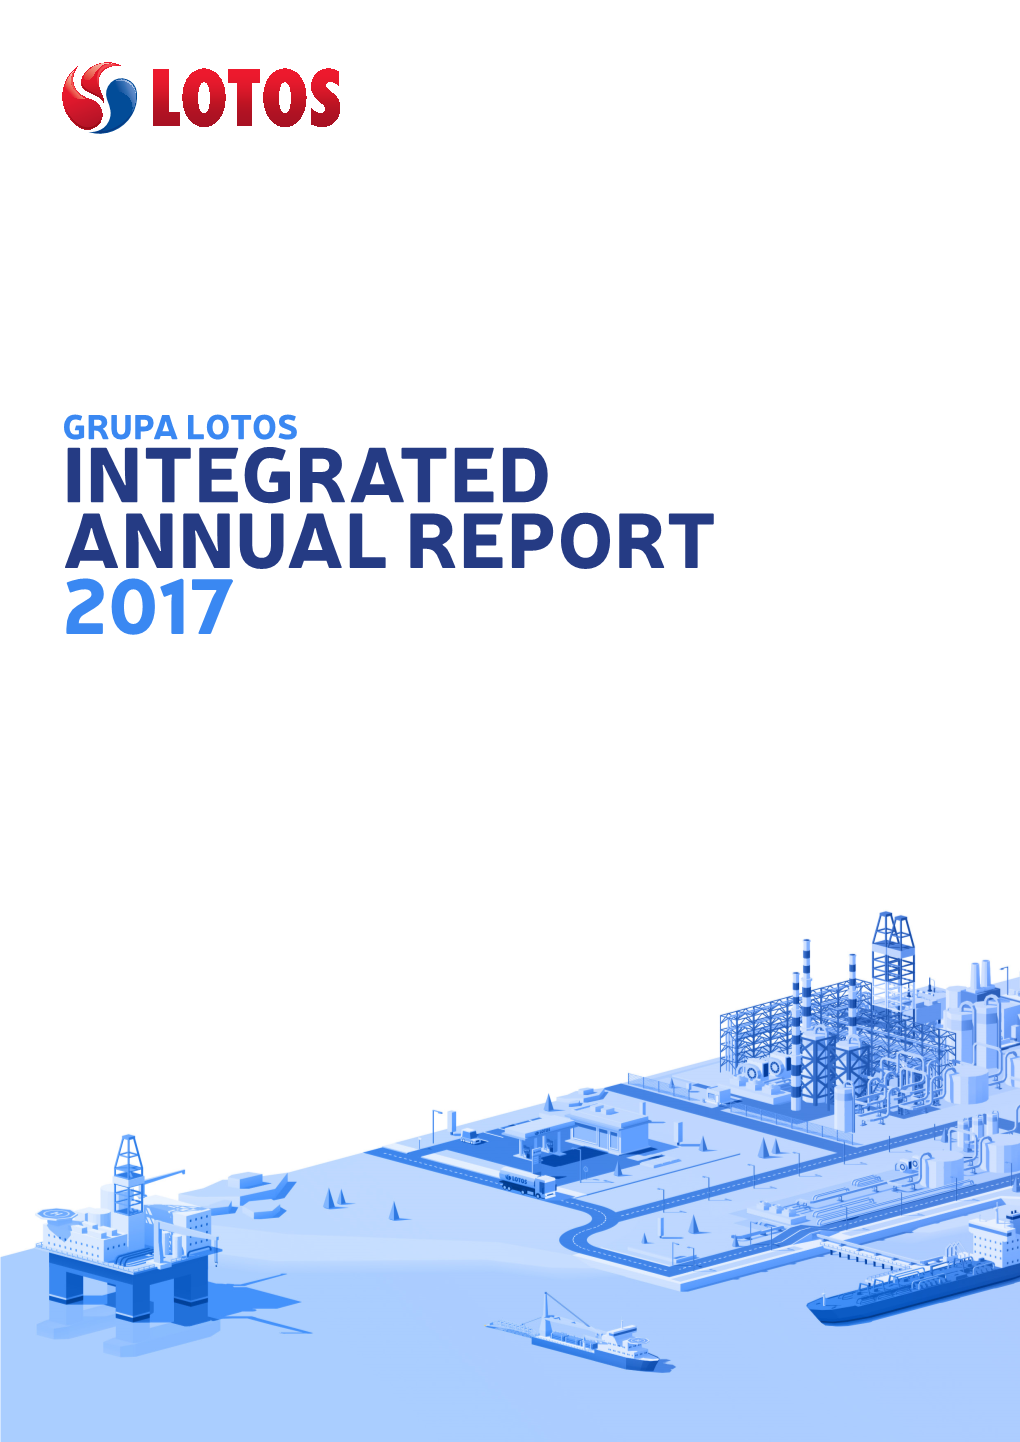 Integrated Annual Report 2017